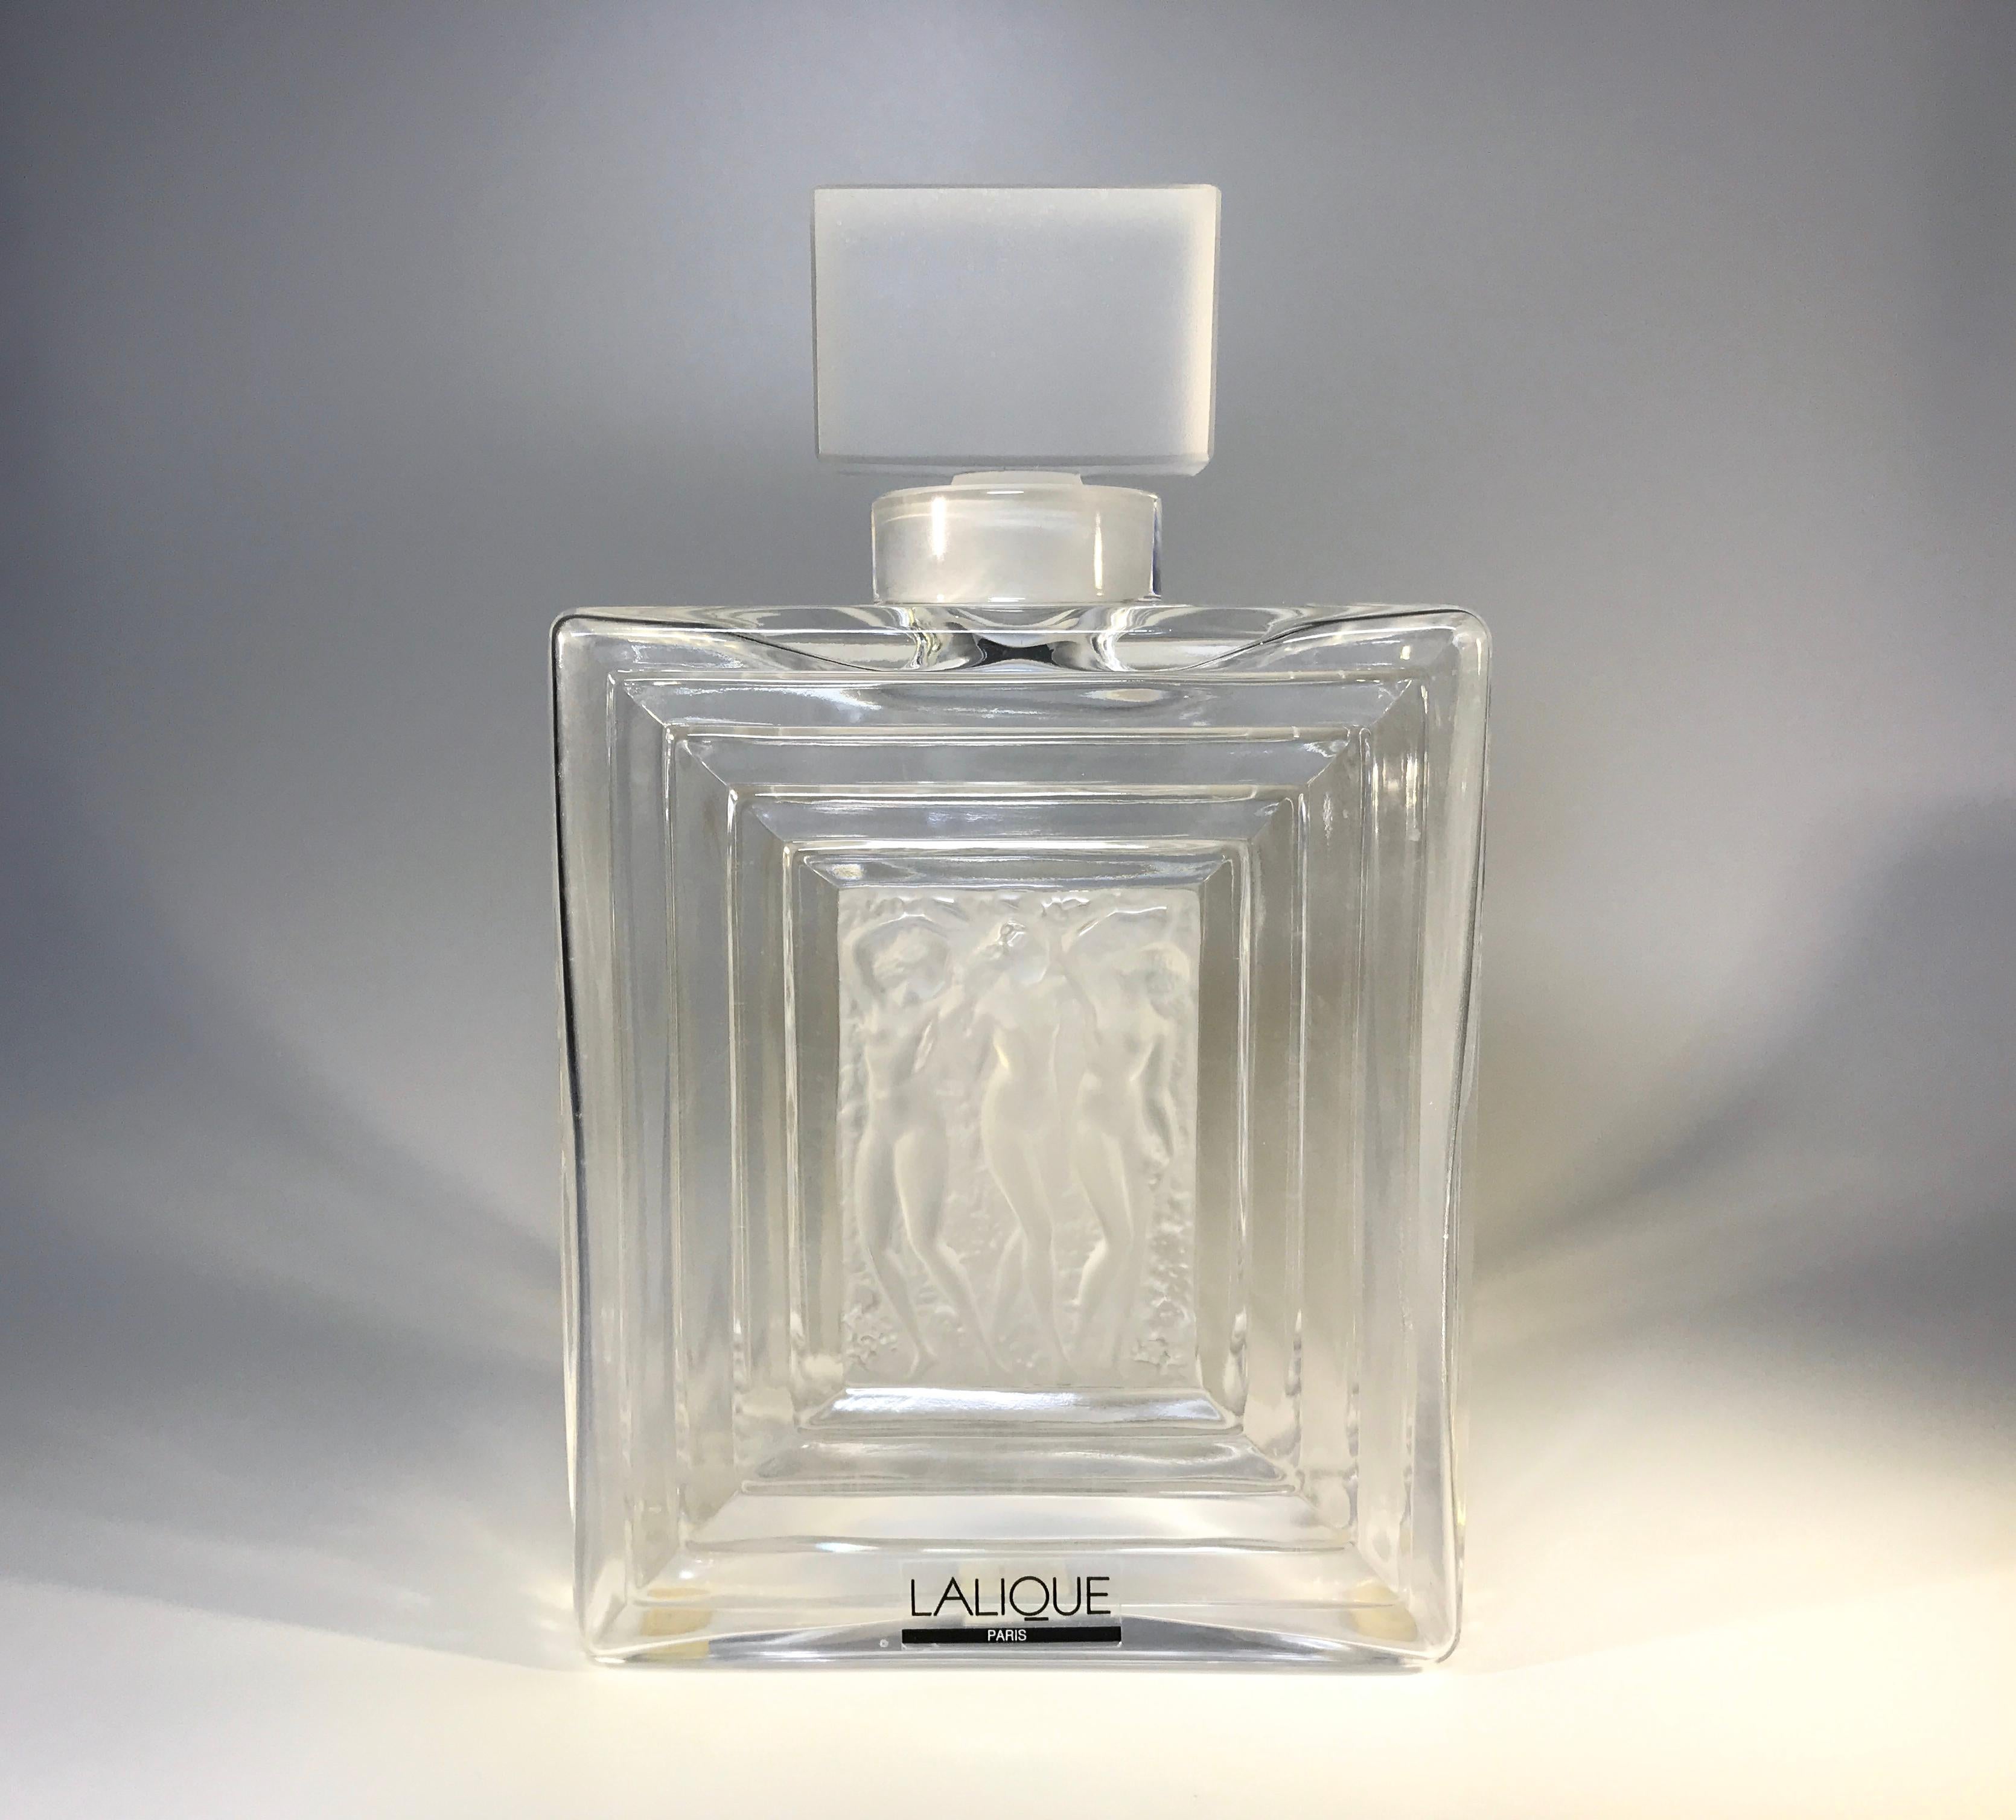 Inspired by the American dancer Isadora Duncan, Rene Lalique designed a series of Duncan perfume bottles that vary in size according to the number of dancers.
This piece is known as the Duncan No.2 flacon and has three dancing nudes in a frosted